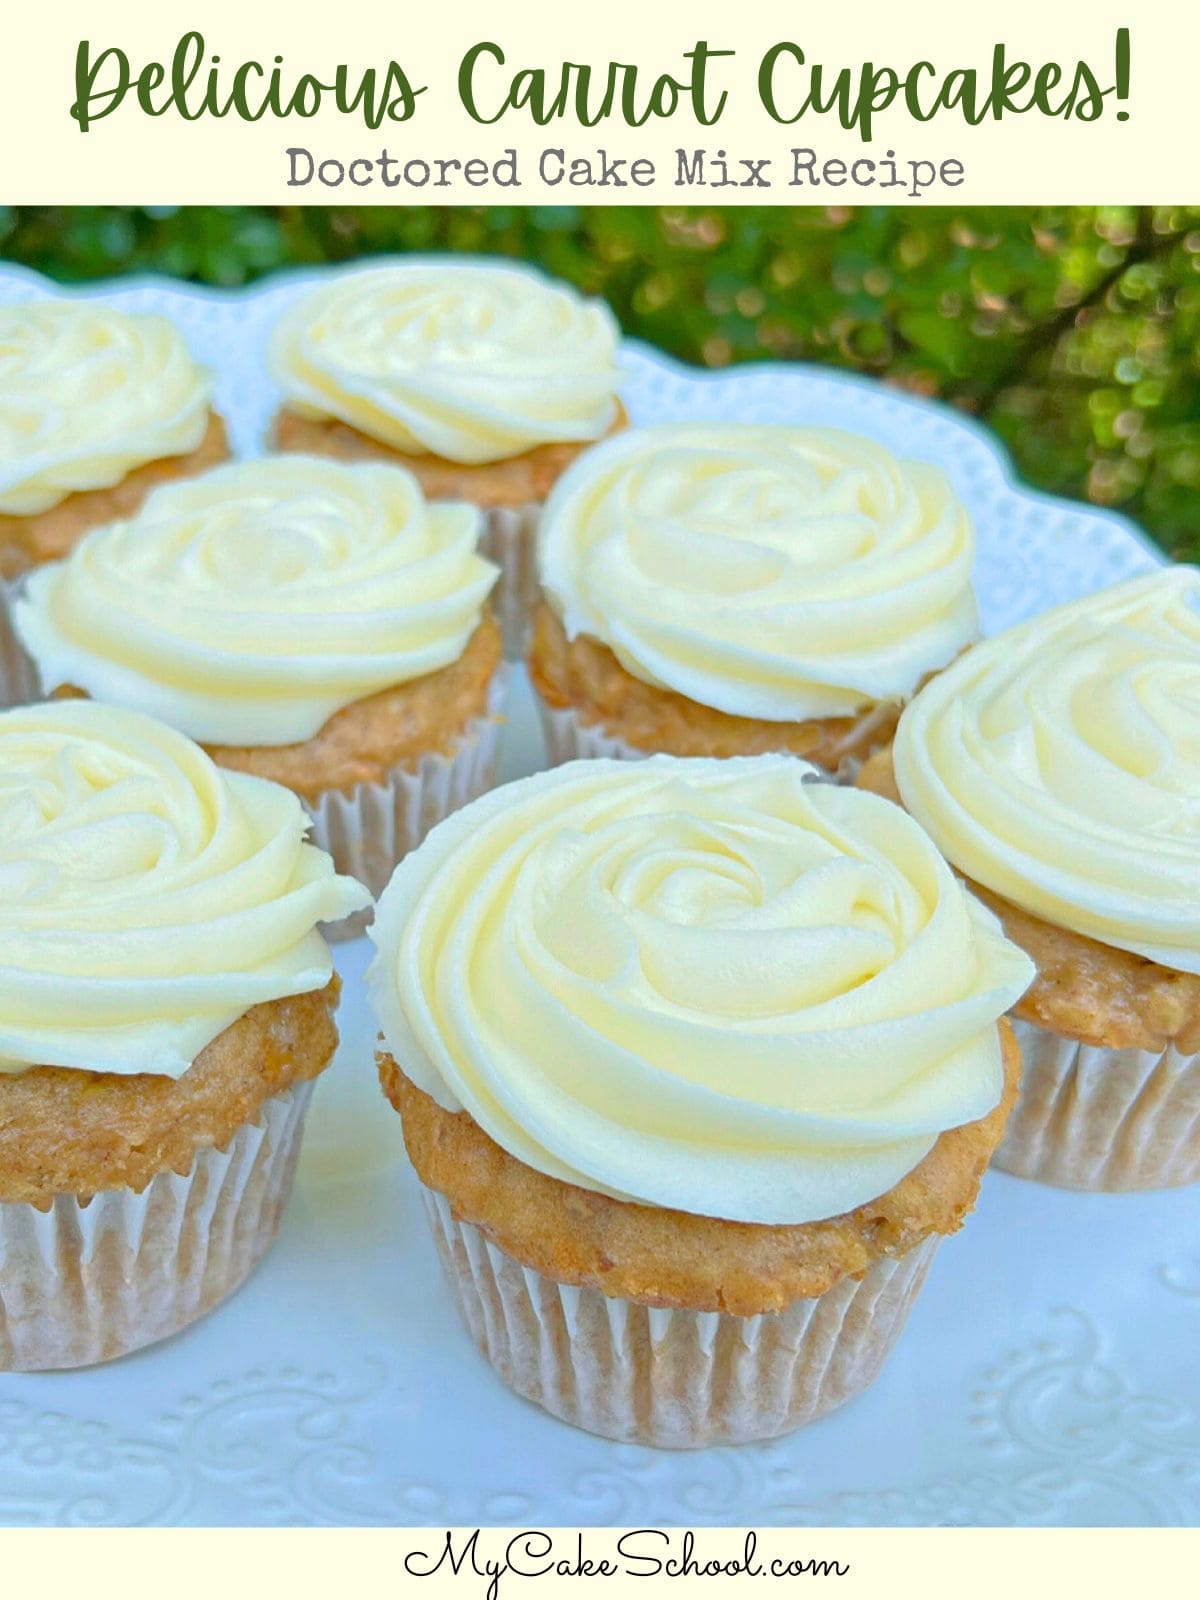 Platter of carrot cupcakes, swirled with cream cheese frosting